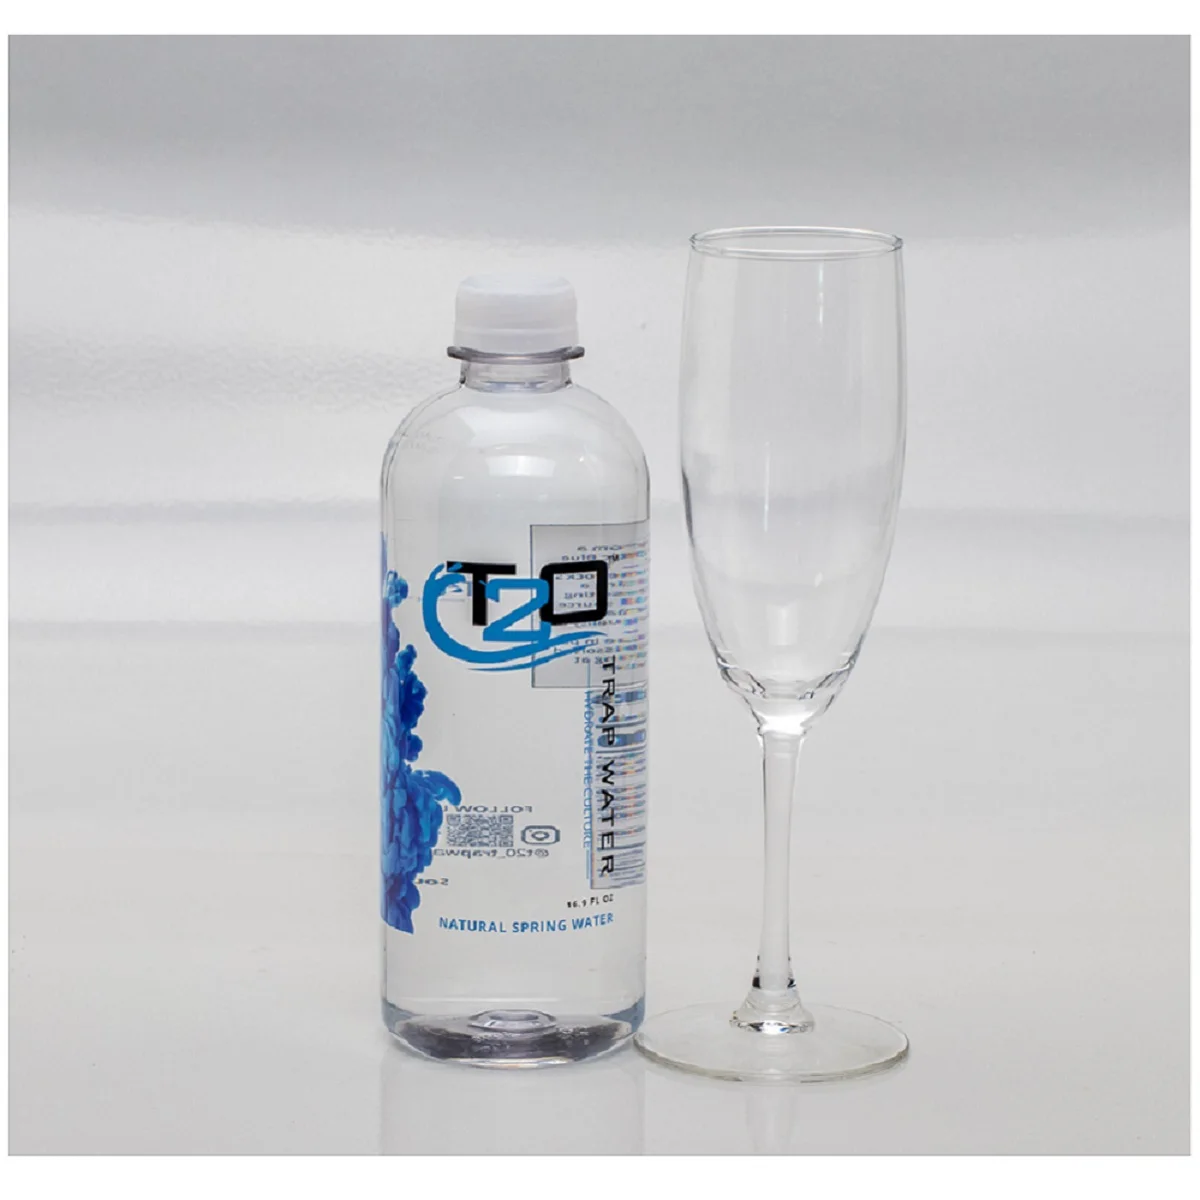 Extremely Low Total Dissolved Solids T20 Trap Water 16.9 FL OZ & 20 FL OZ 100% ALL Natural Spring Water MADE in USA